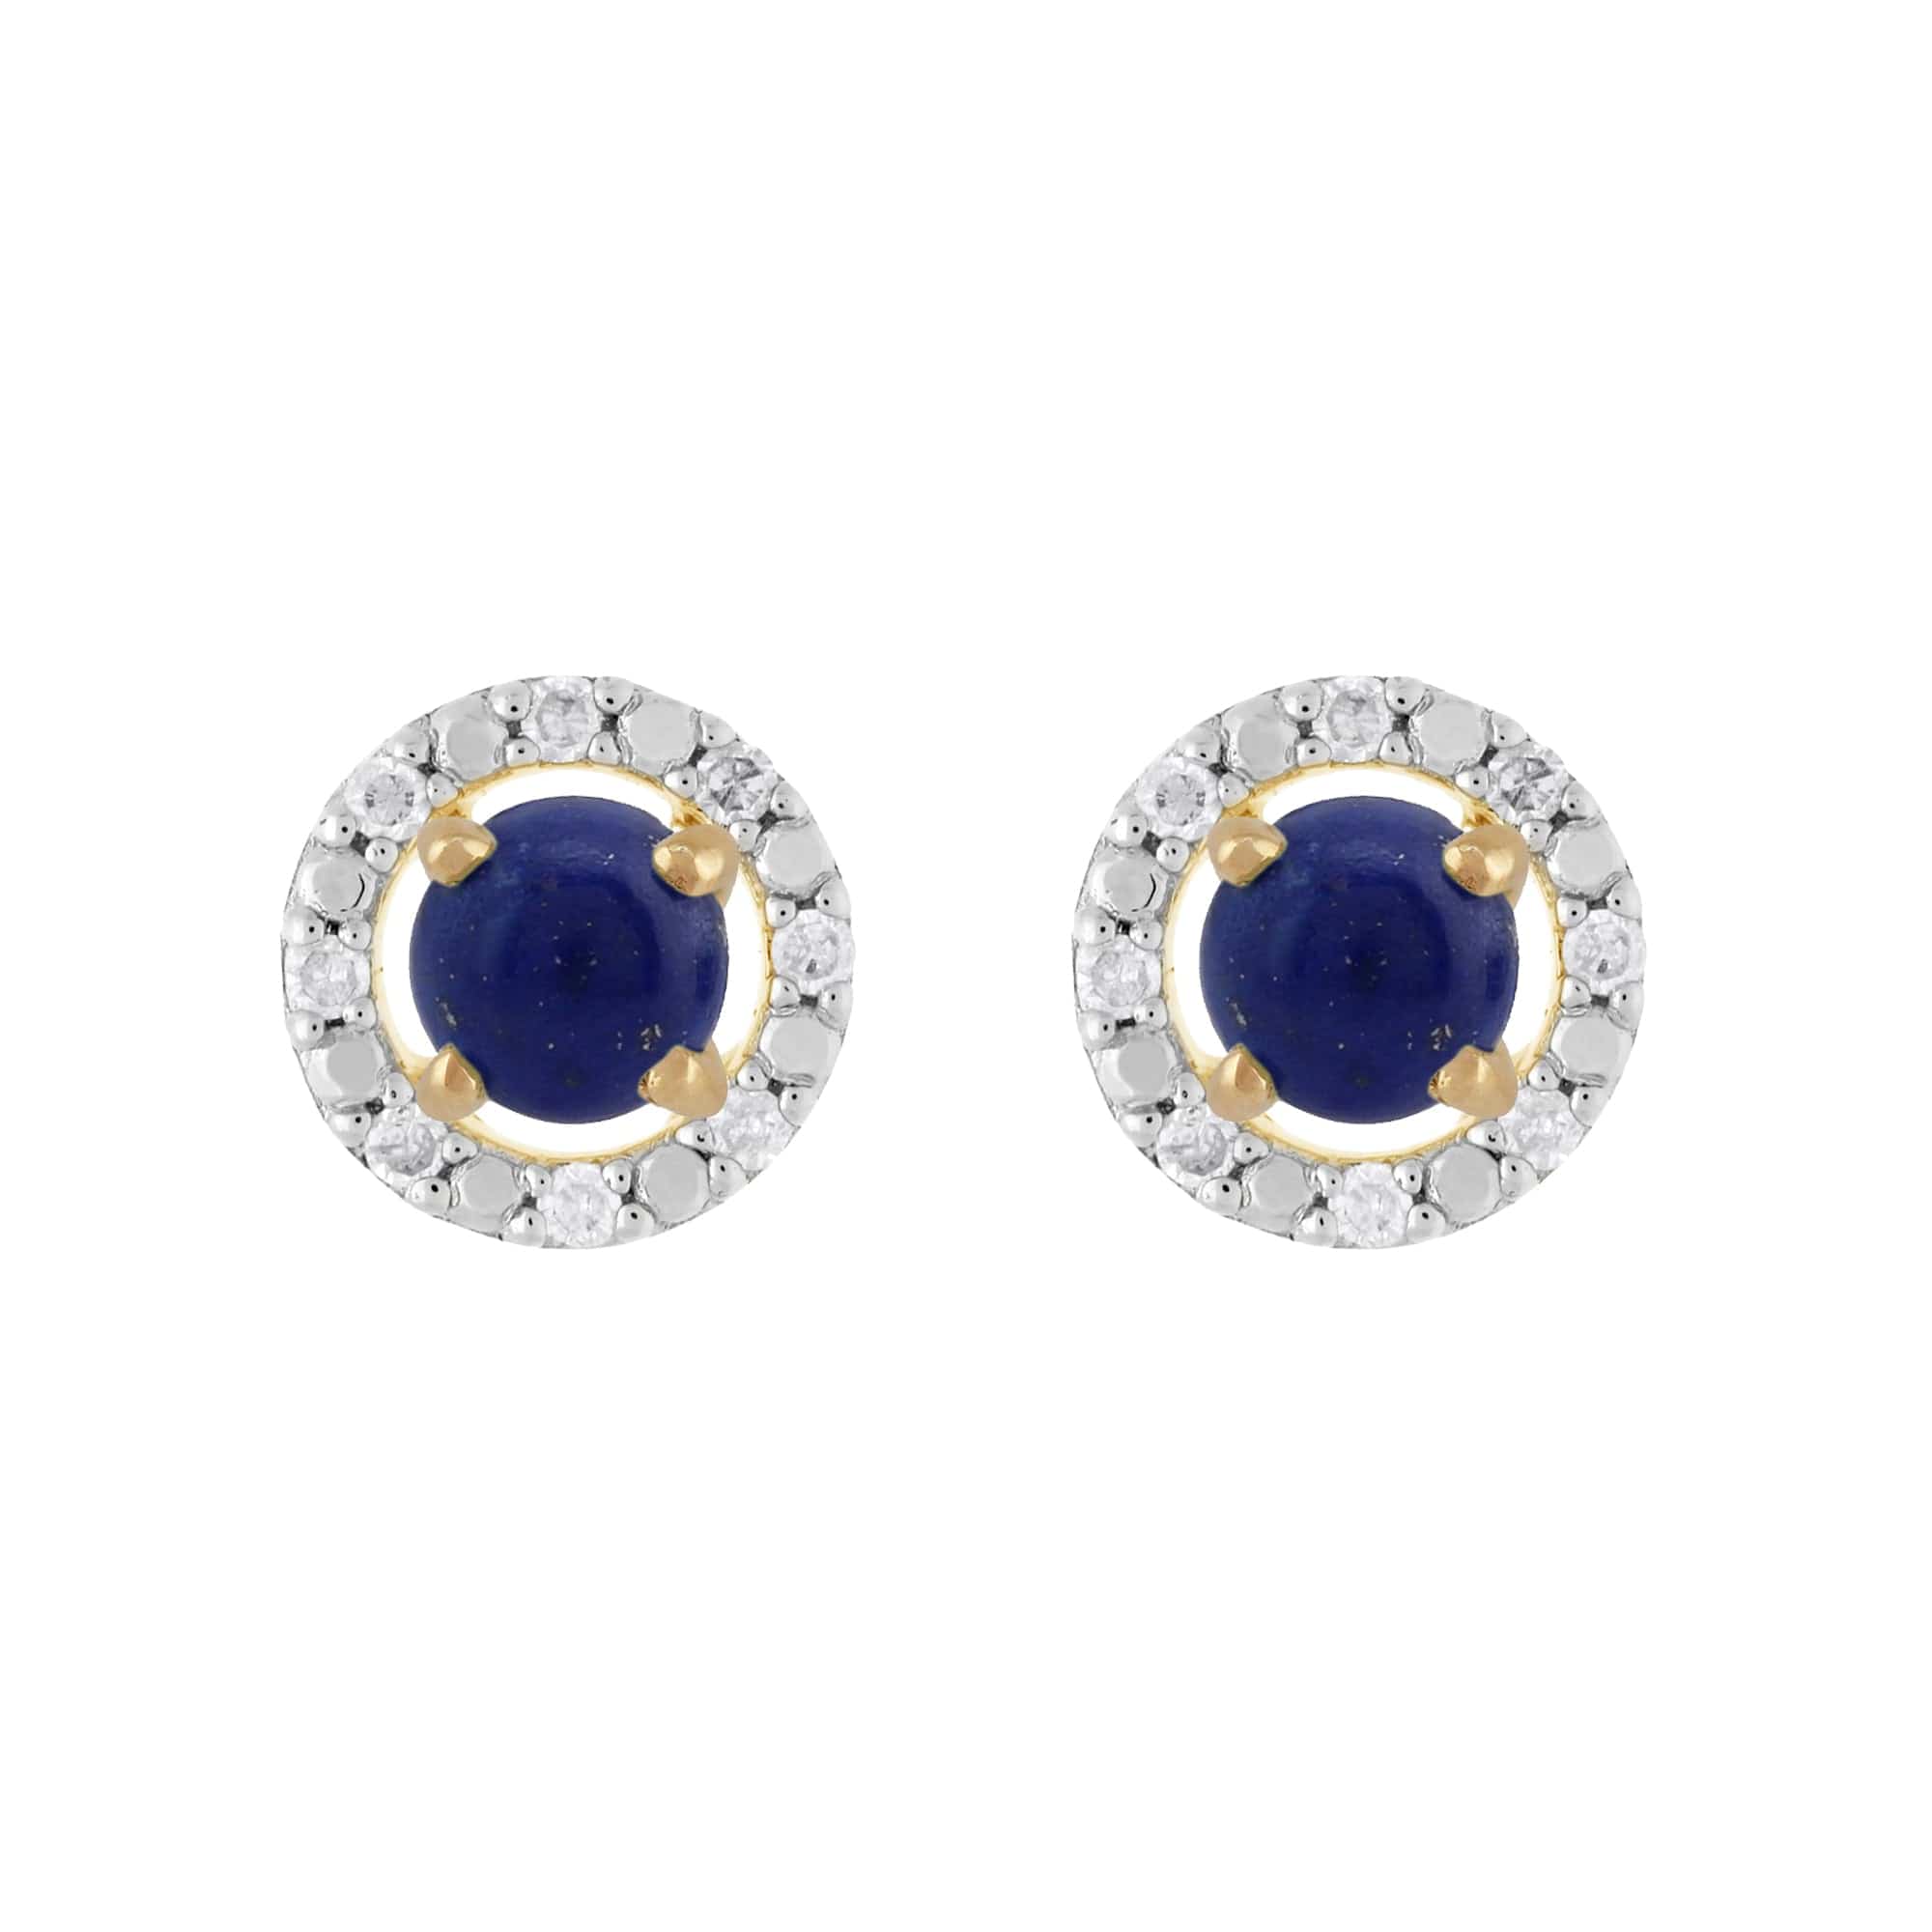 183E0083419-191E0376019 Classic Round Lapis Lazuli Stud Earrings with Detachable Diamond Round Earrings Jacket Set in 9ct Yellow Gold 1